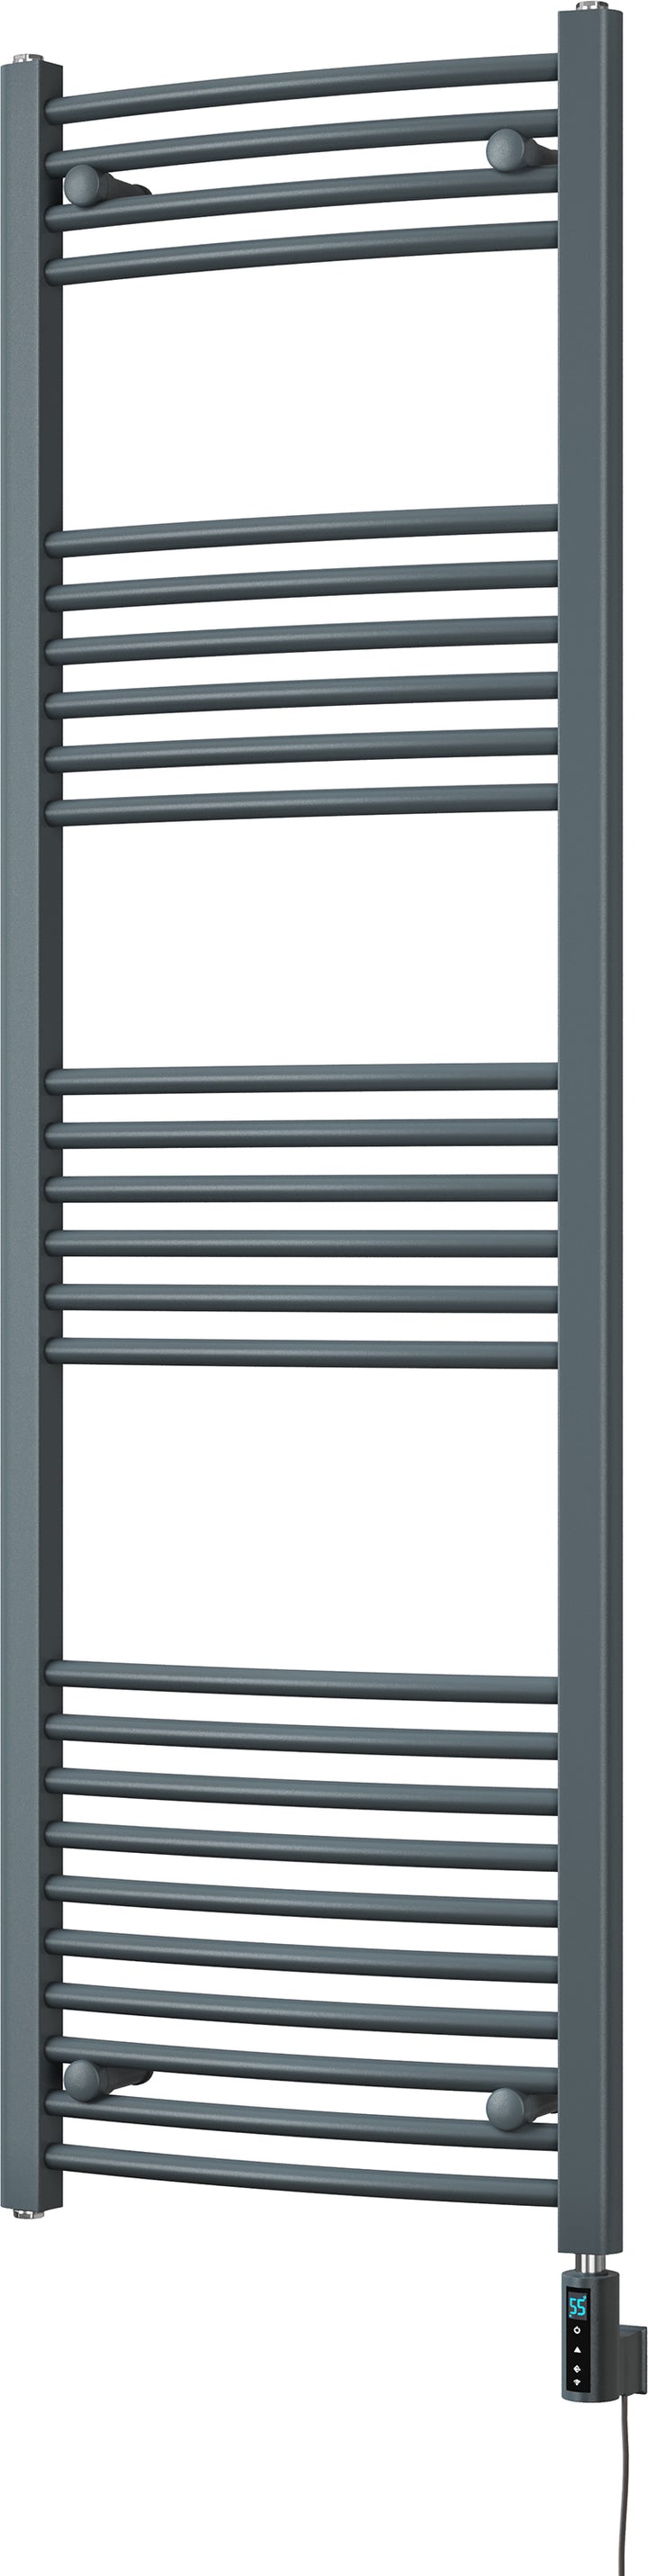 Zennor - Anthracite Electric Towel Rail H1600mm x W500mm Curved 600w Thermostatic WIFI